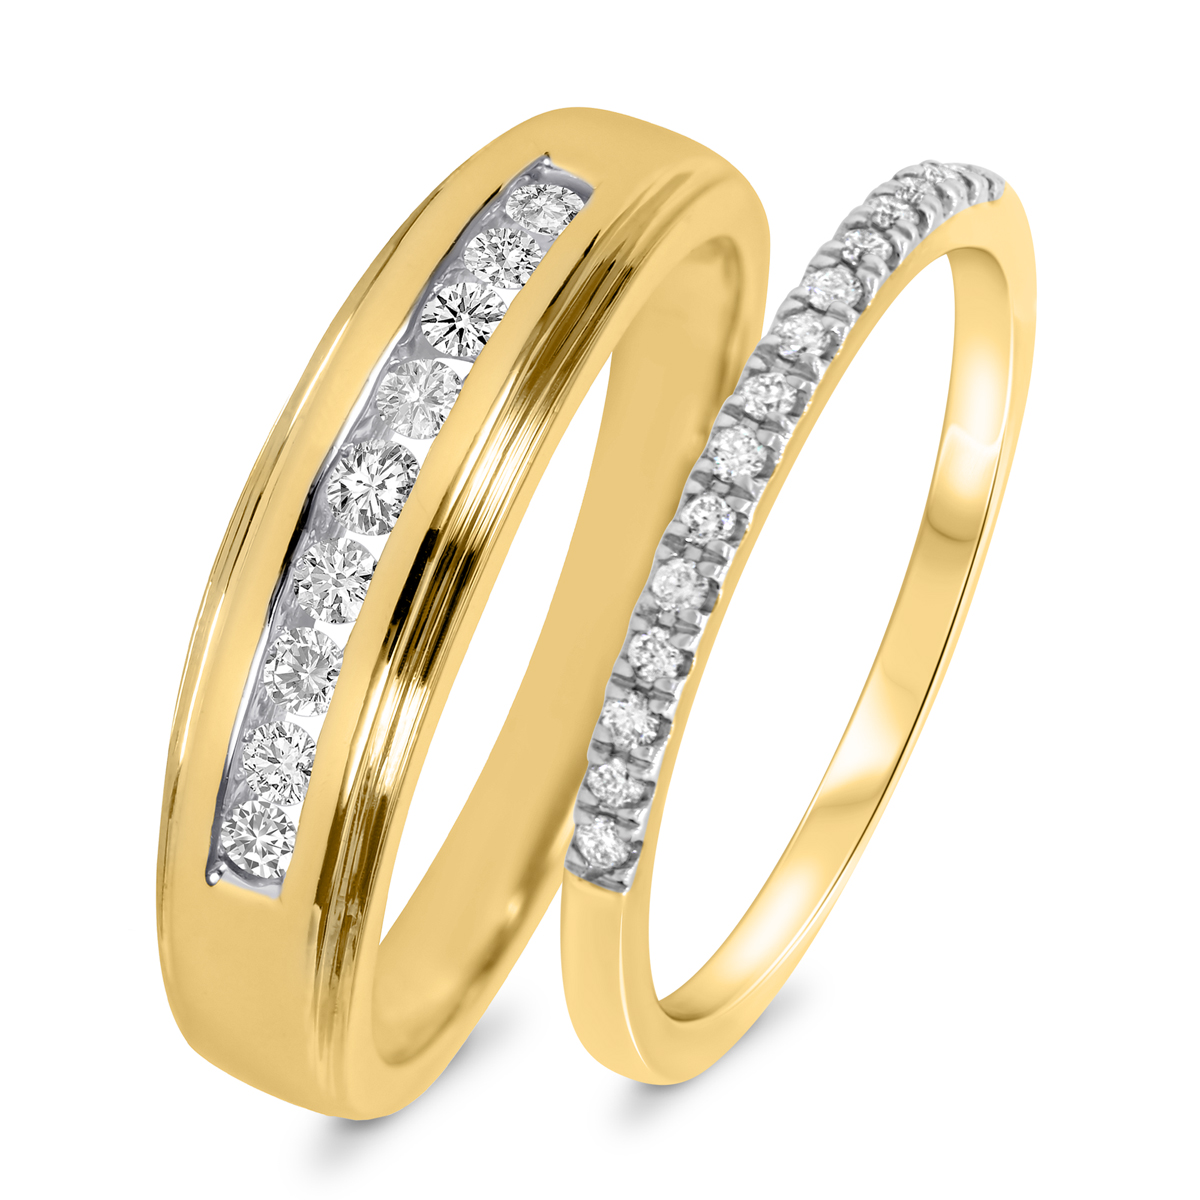 Florance 1/3 ct Tw. Diamond His and Hers Matching Wedding Band Set 14K Yellow Gold